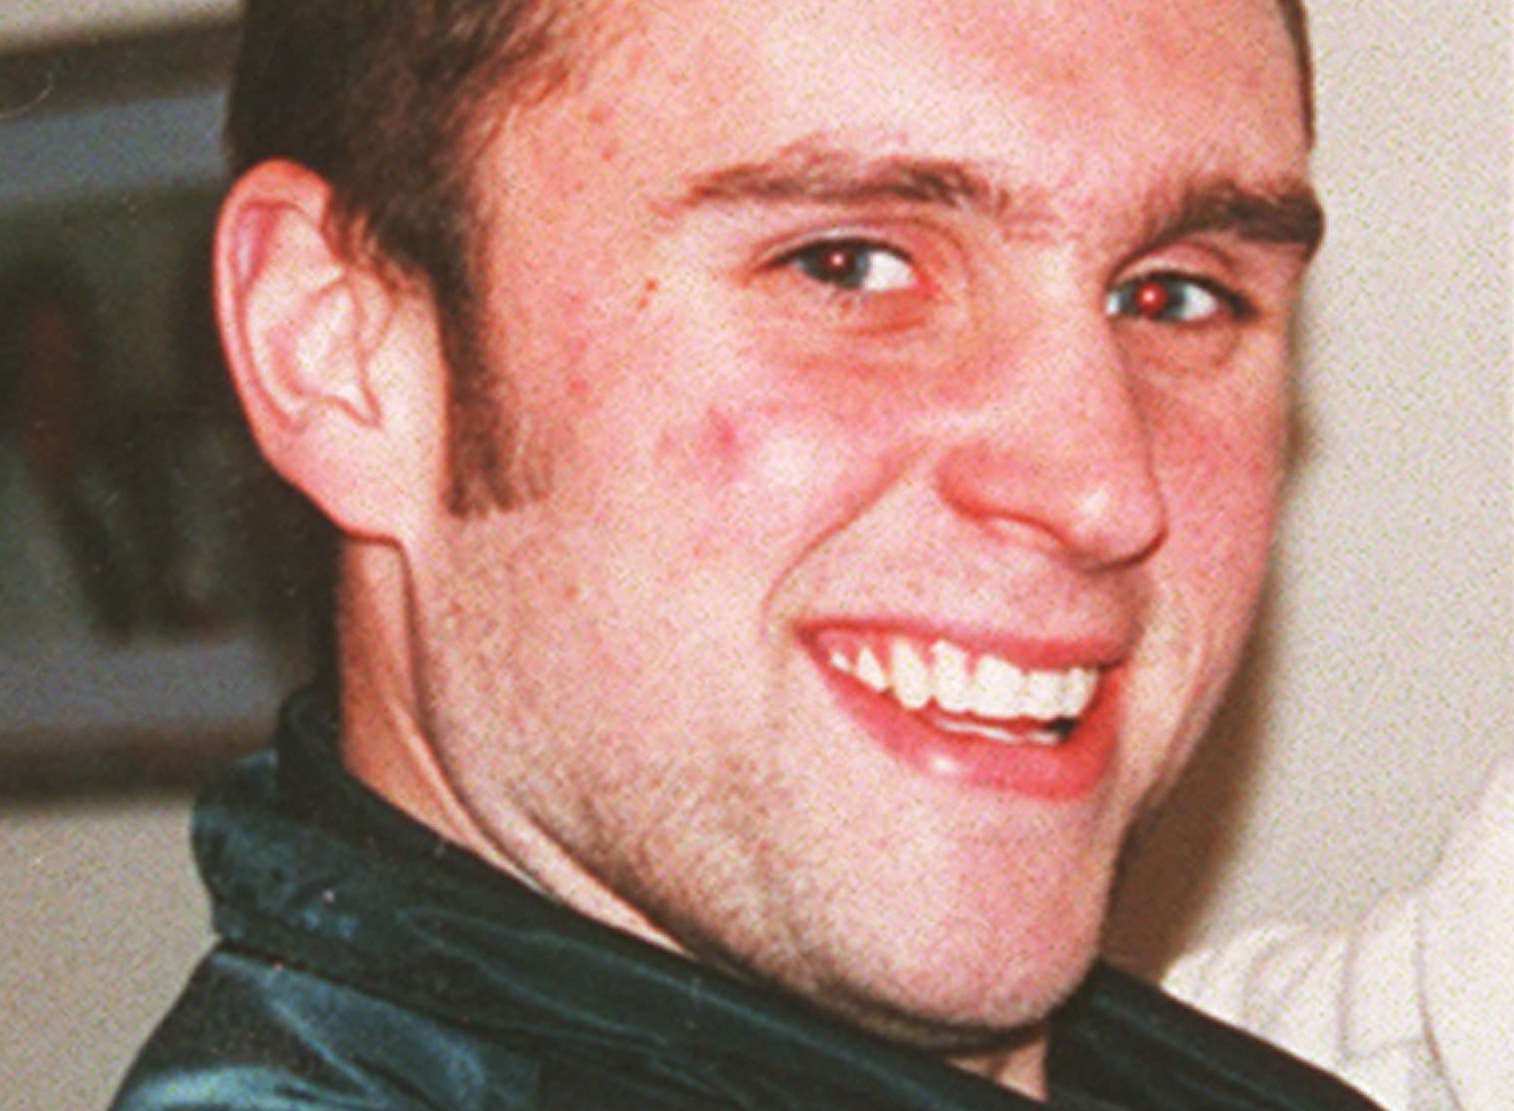 Stephen Cameron, killed by Noye in a road rage incident